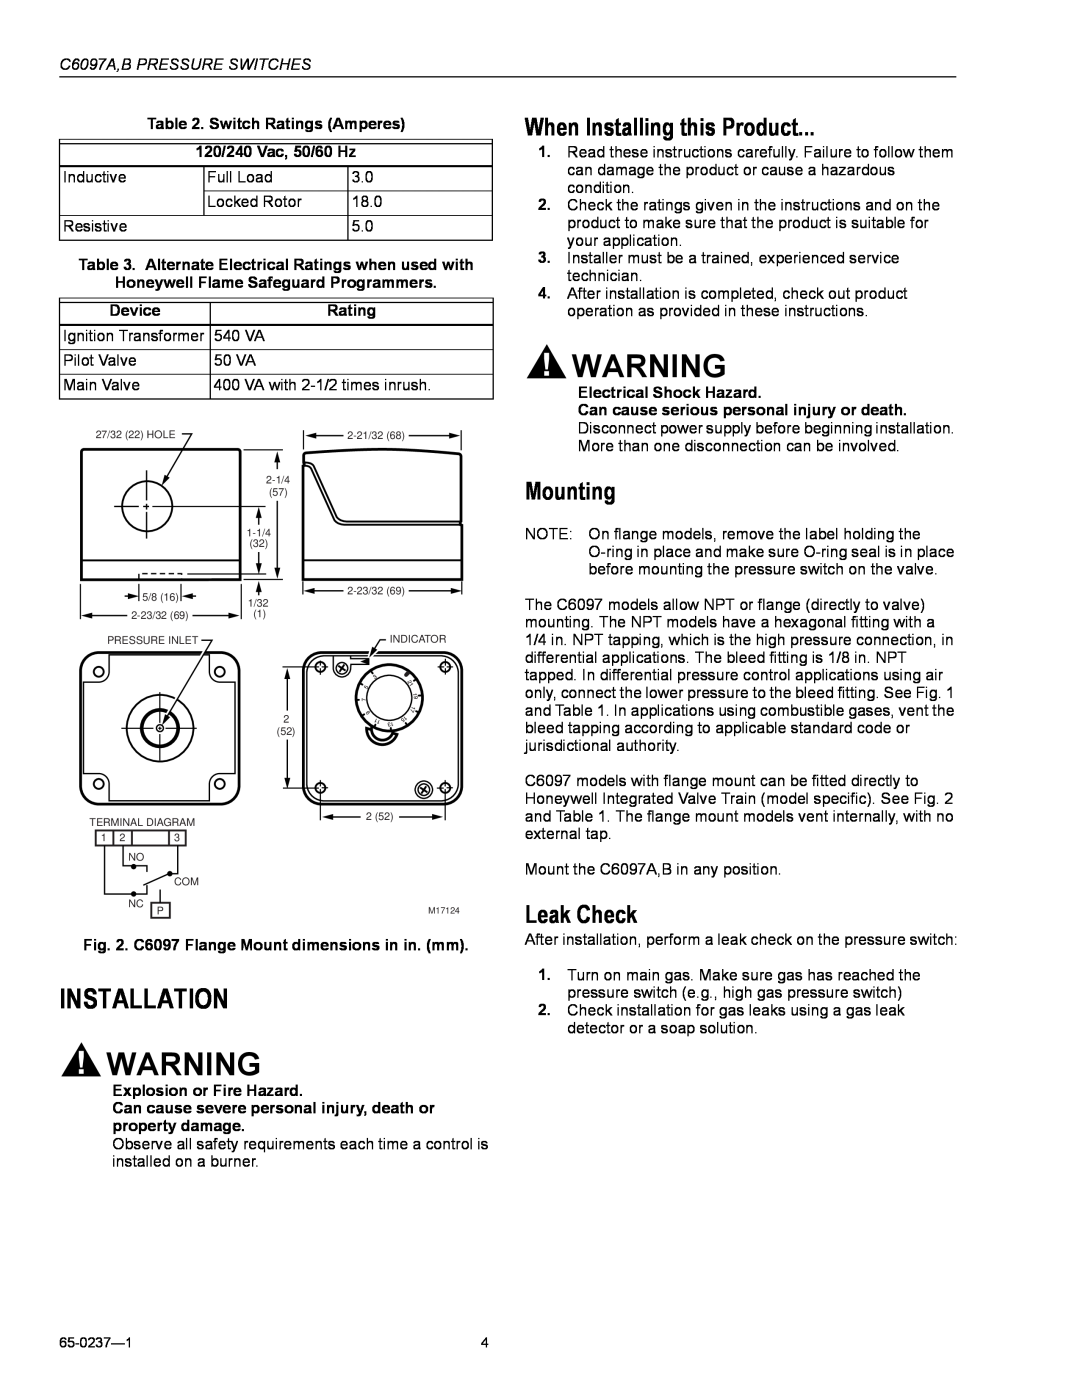 Honeywell Installation, When Installing this Product, Mounting, Leak Check, C6097A,B PRESSURE SWITCHES, Device, Rating 